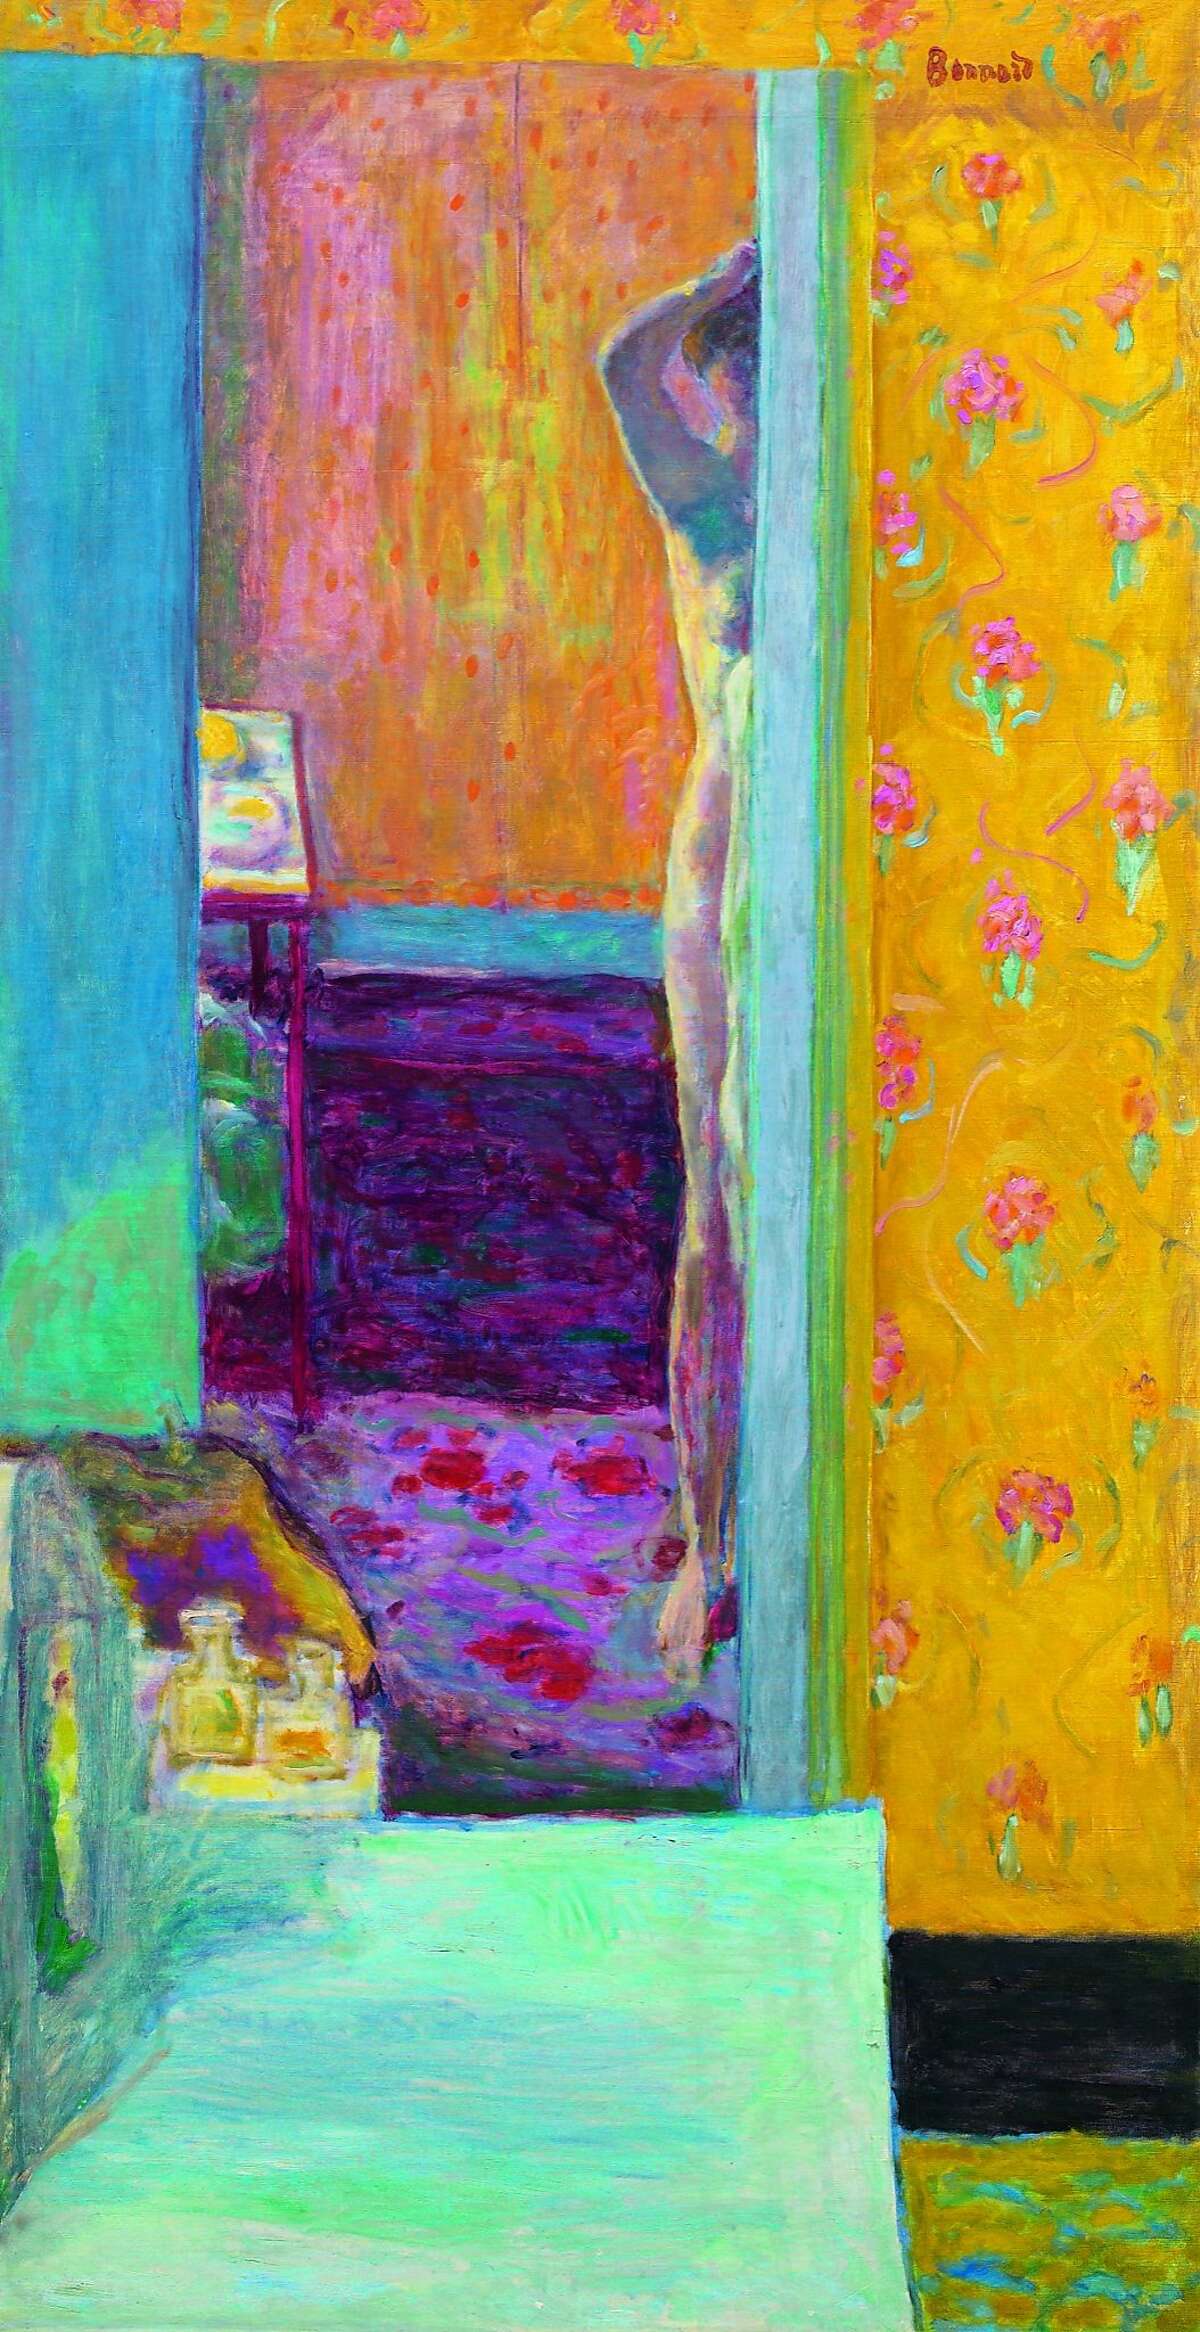 Pierre Bonnard's "Nu dans un interieur" (1935), oil on canvas. 134 x 69.2 cm. On view at the Legion of Honor in "Pierre Bonnard: Painting Arcadia," Feb. 6-May 15.